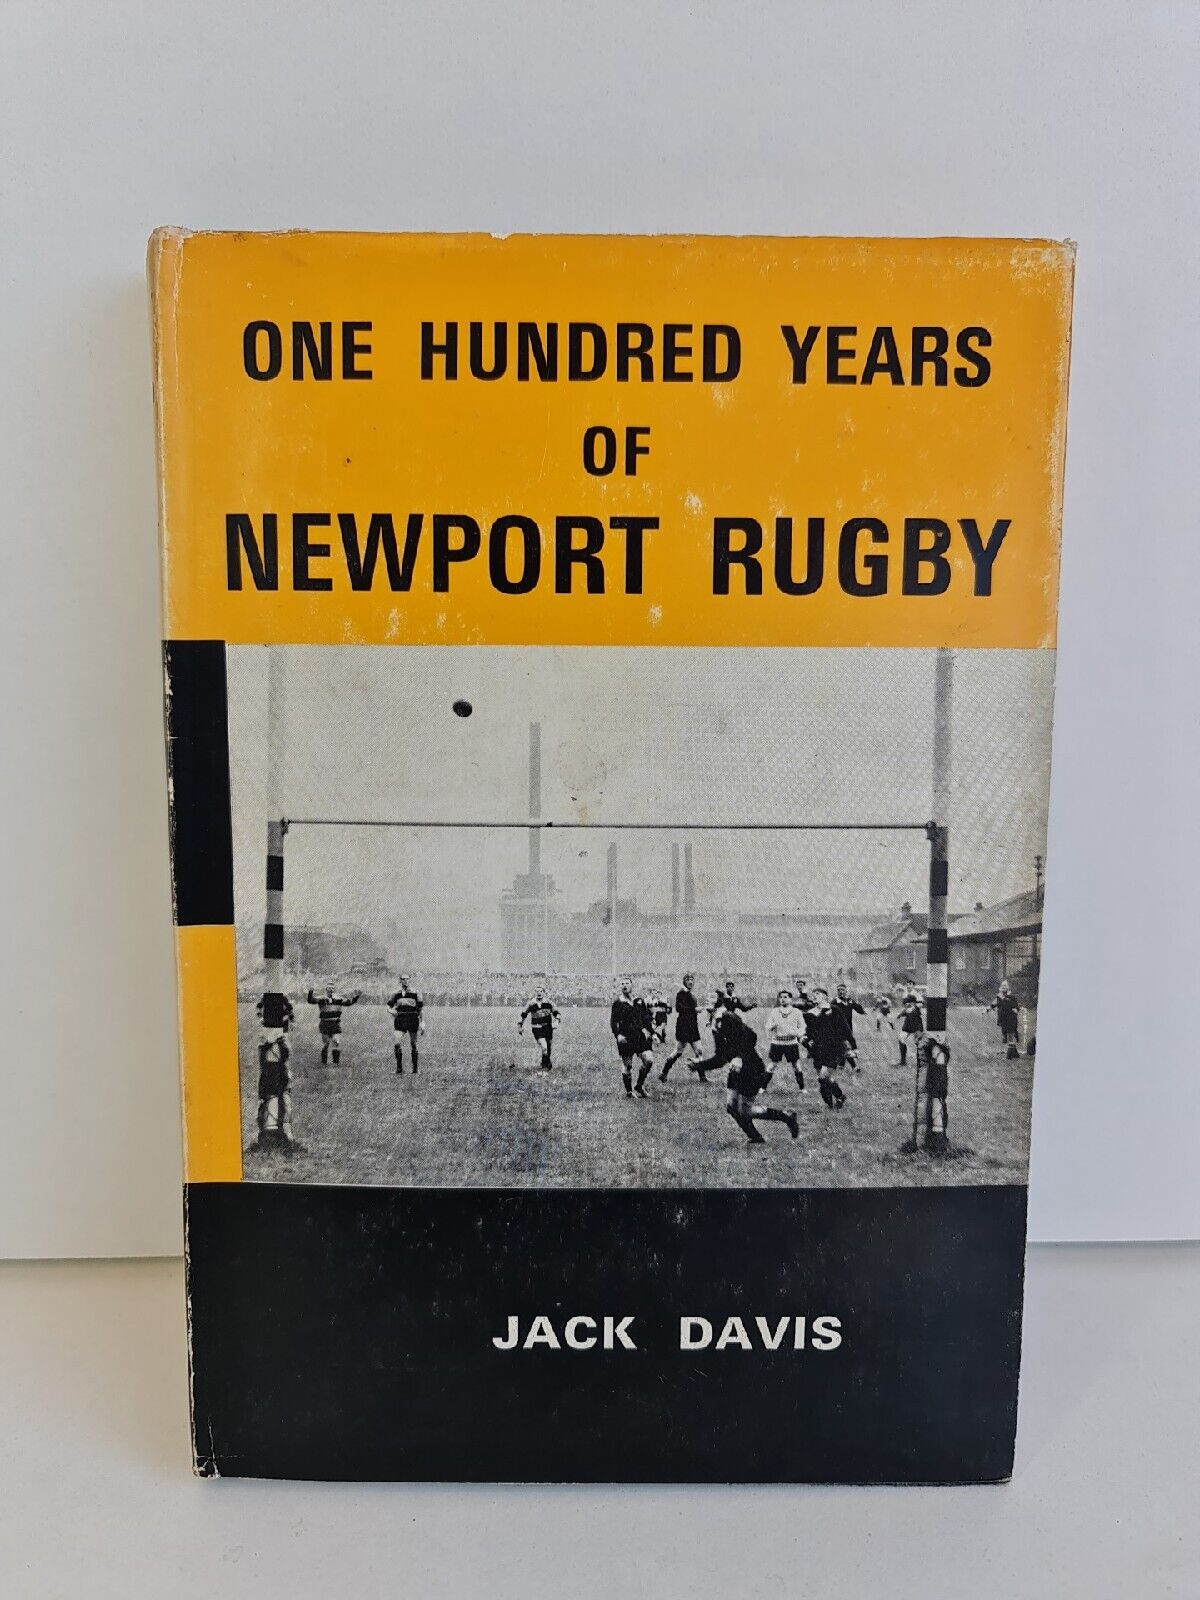 One Hundred Years of Newport Rugby by Jack Davis (1974)